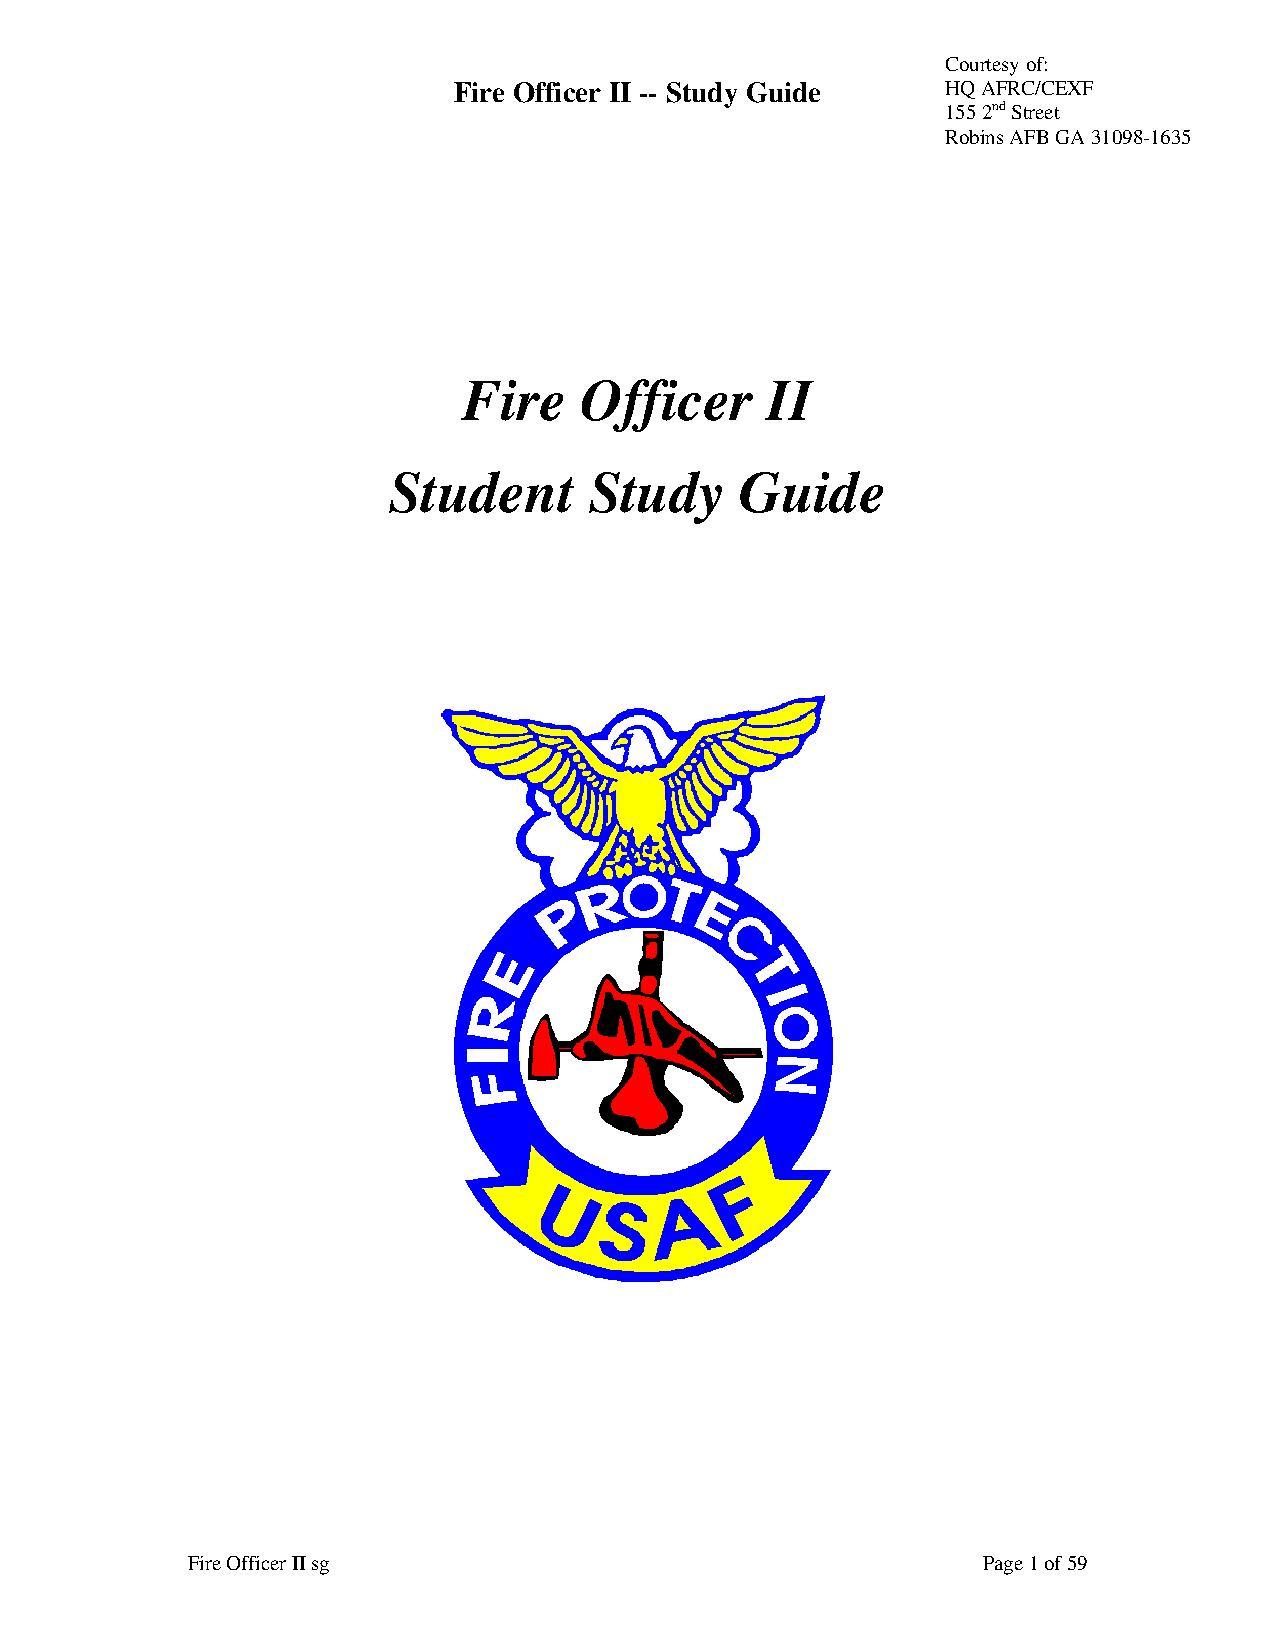 correctional officer study guide pdf